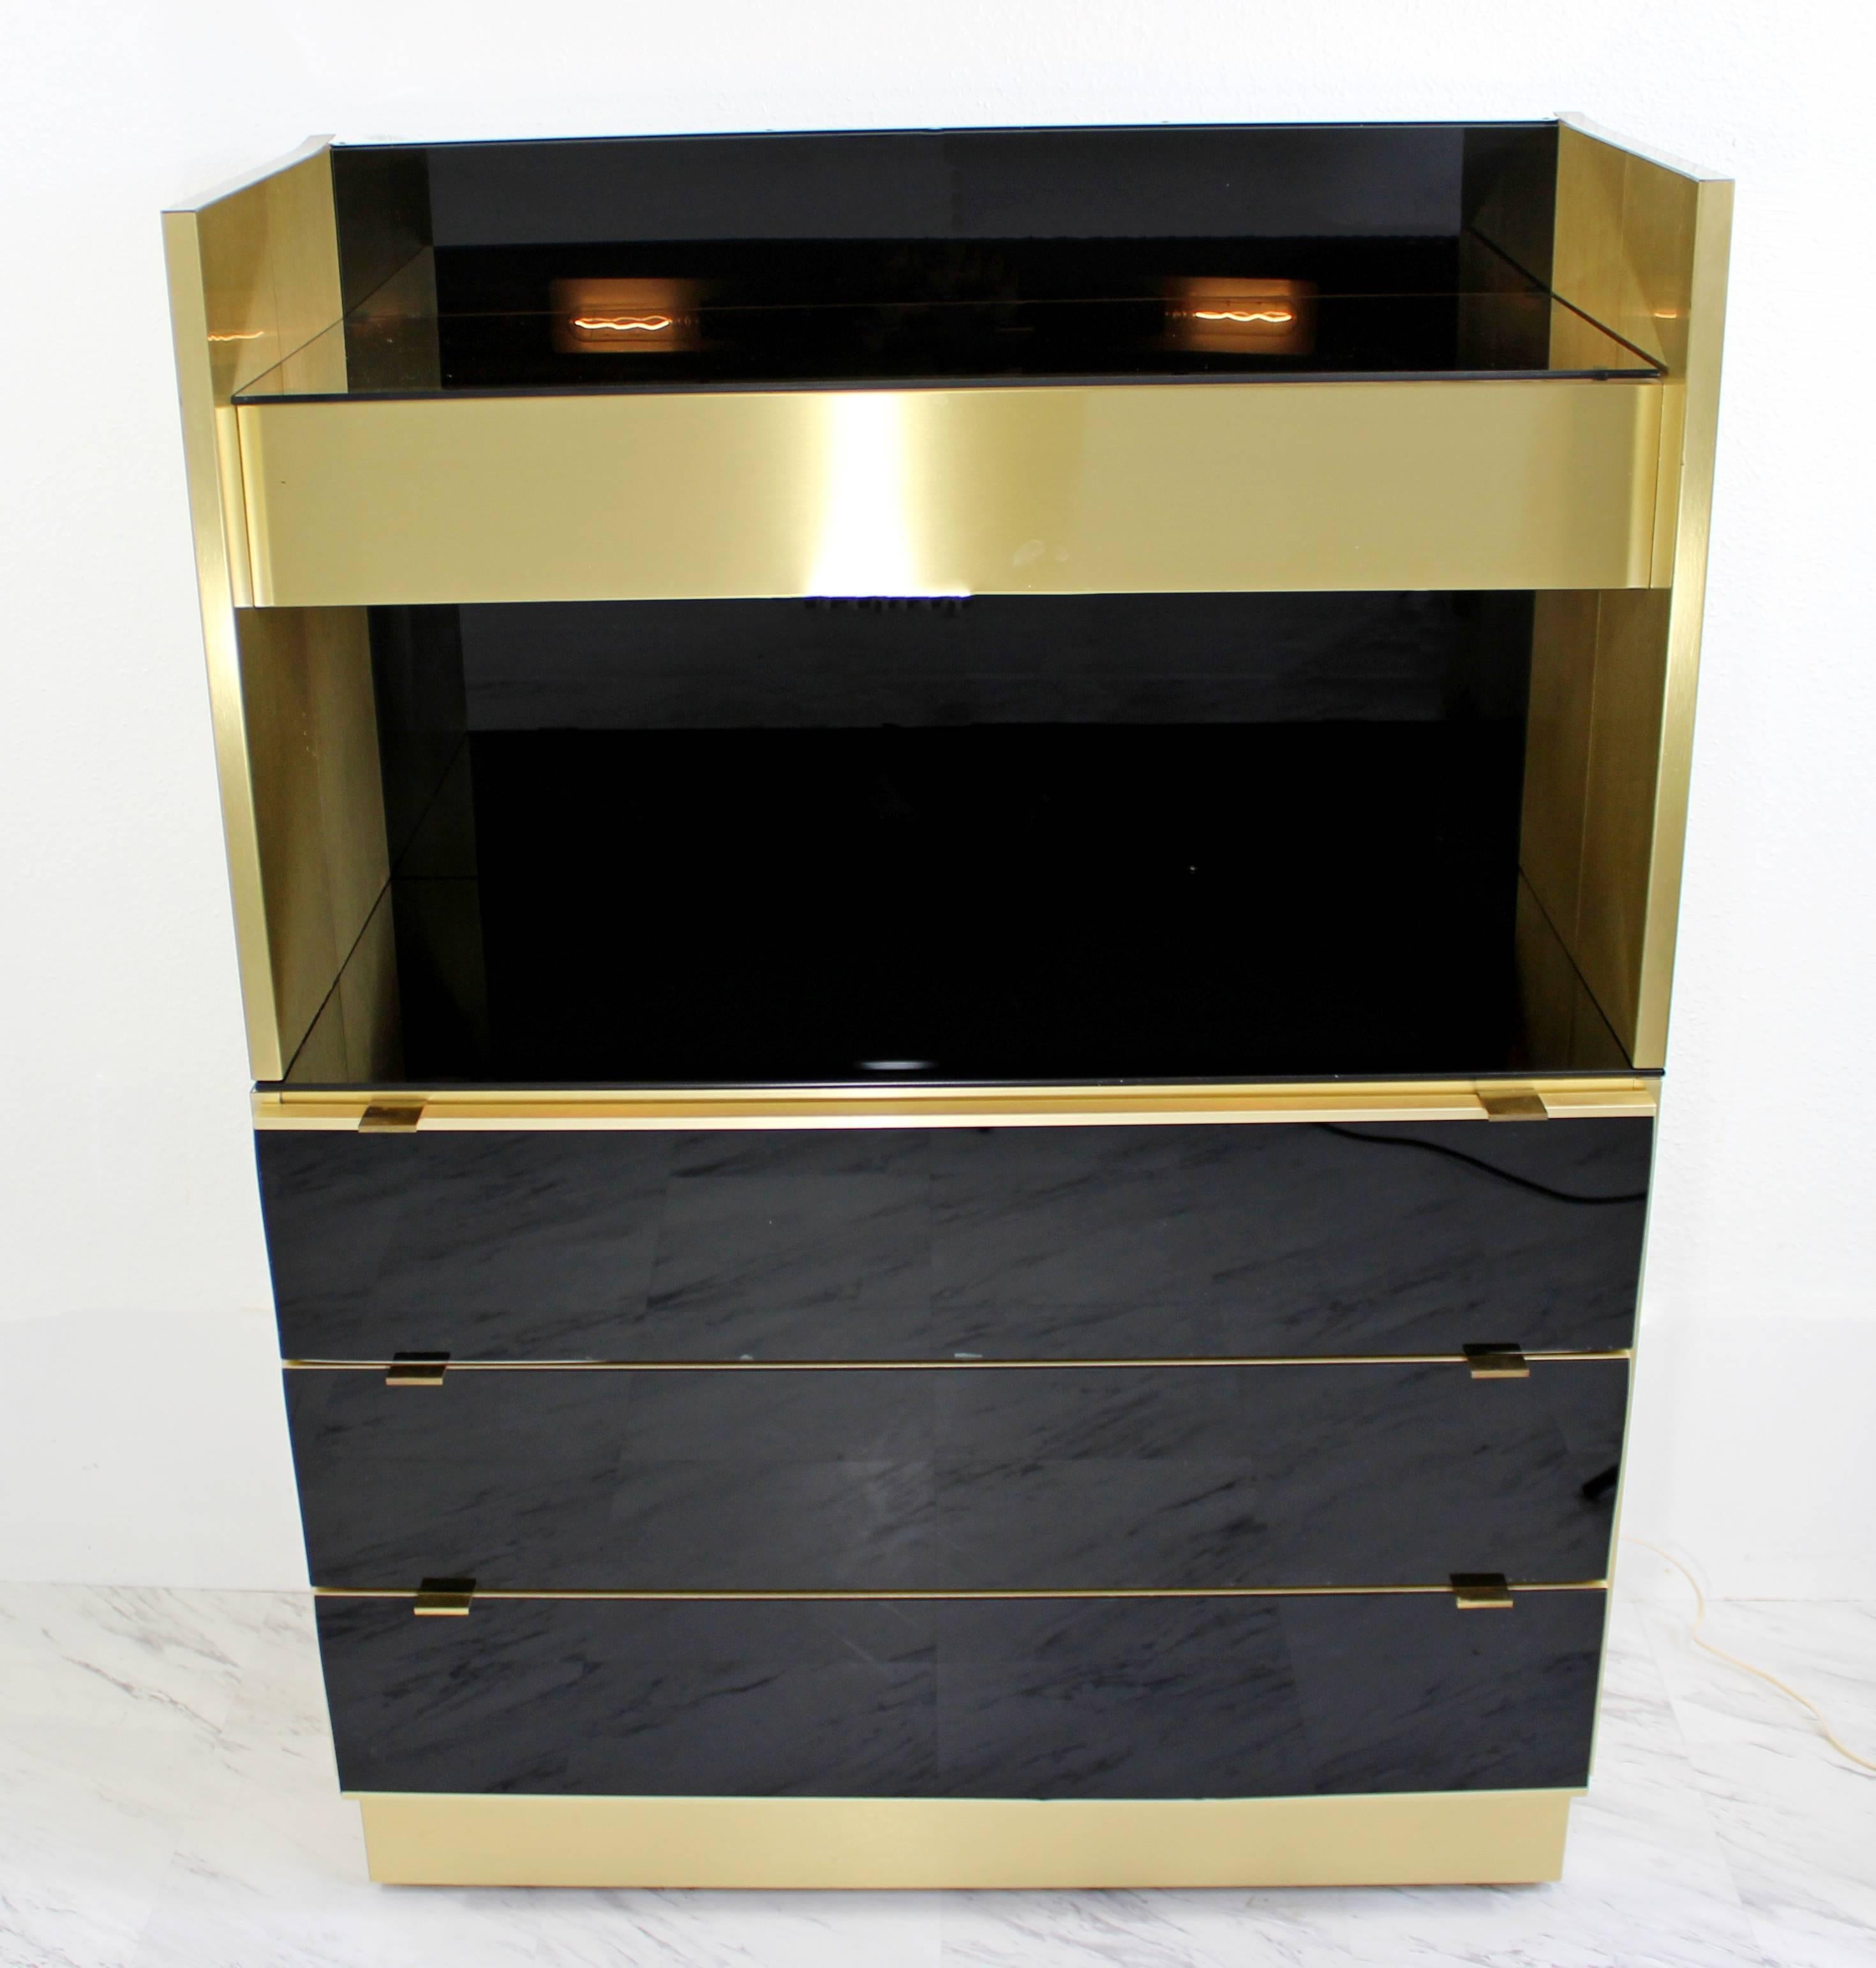 For your consideration is an incredibly sexy, standing two-piece dry bar, made of brass, smoked glass and mirror, with two lights under the top shelf and three drawers on the bottom. In great condition. The dimensions are 36